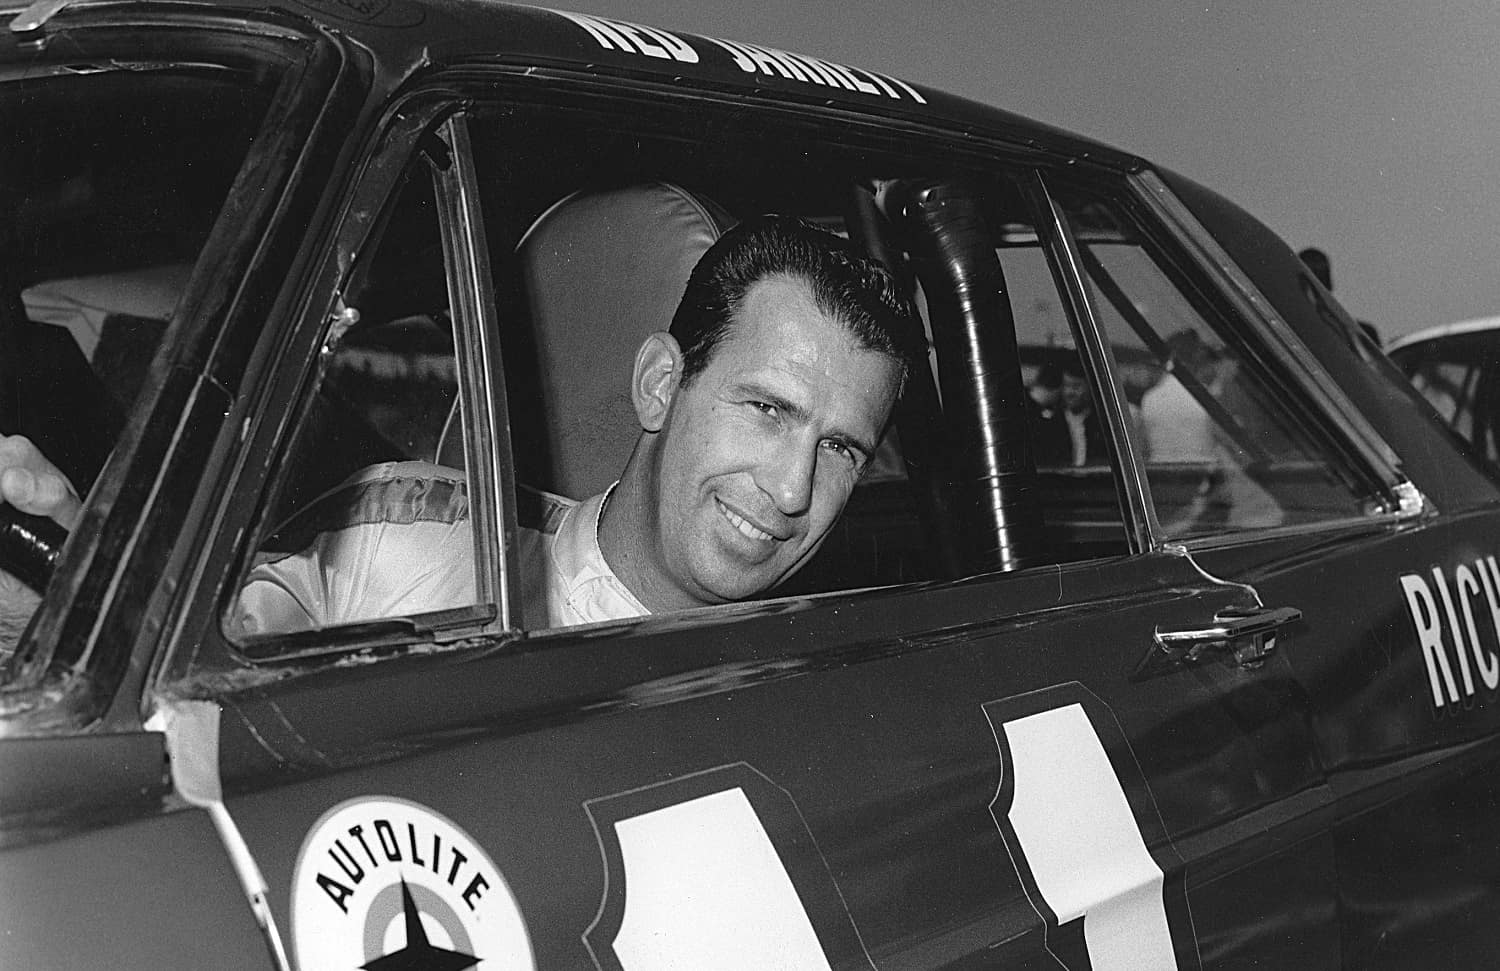 Ned Jarrett began his final year on the NASCAR Cup circuit by finishing seventh in the 1966 Daytona 500 at Daytona International Speedway. ISC Images & Archives via Getty Images